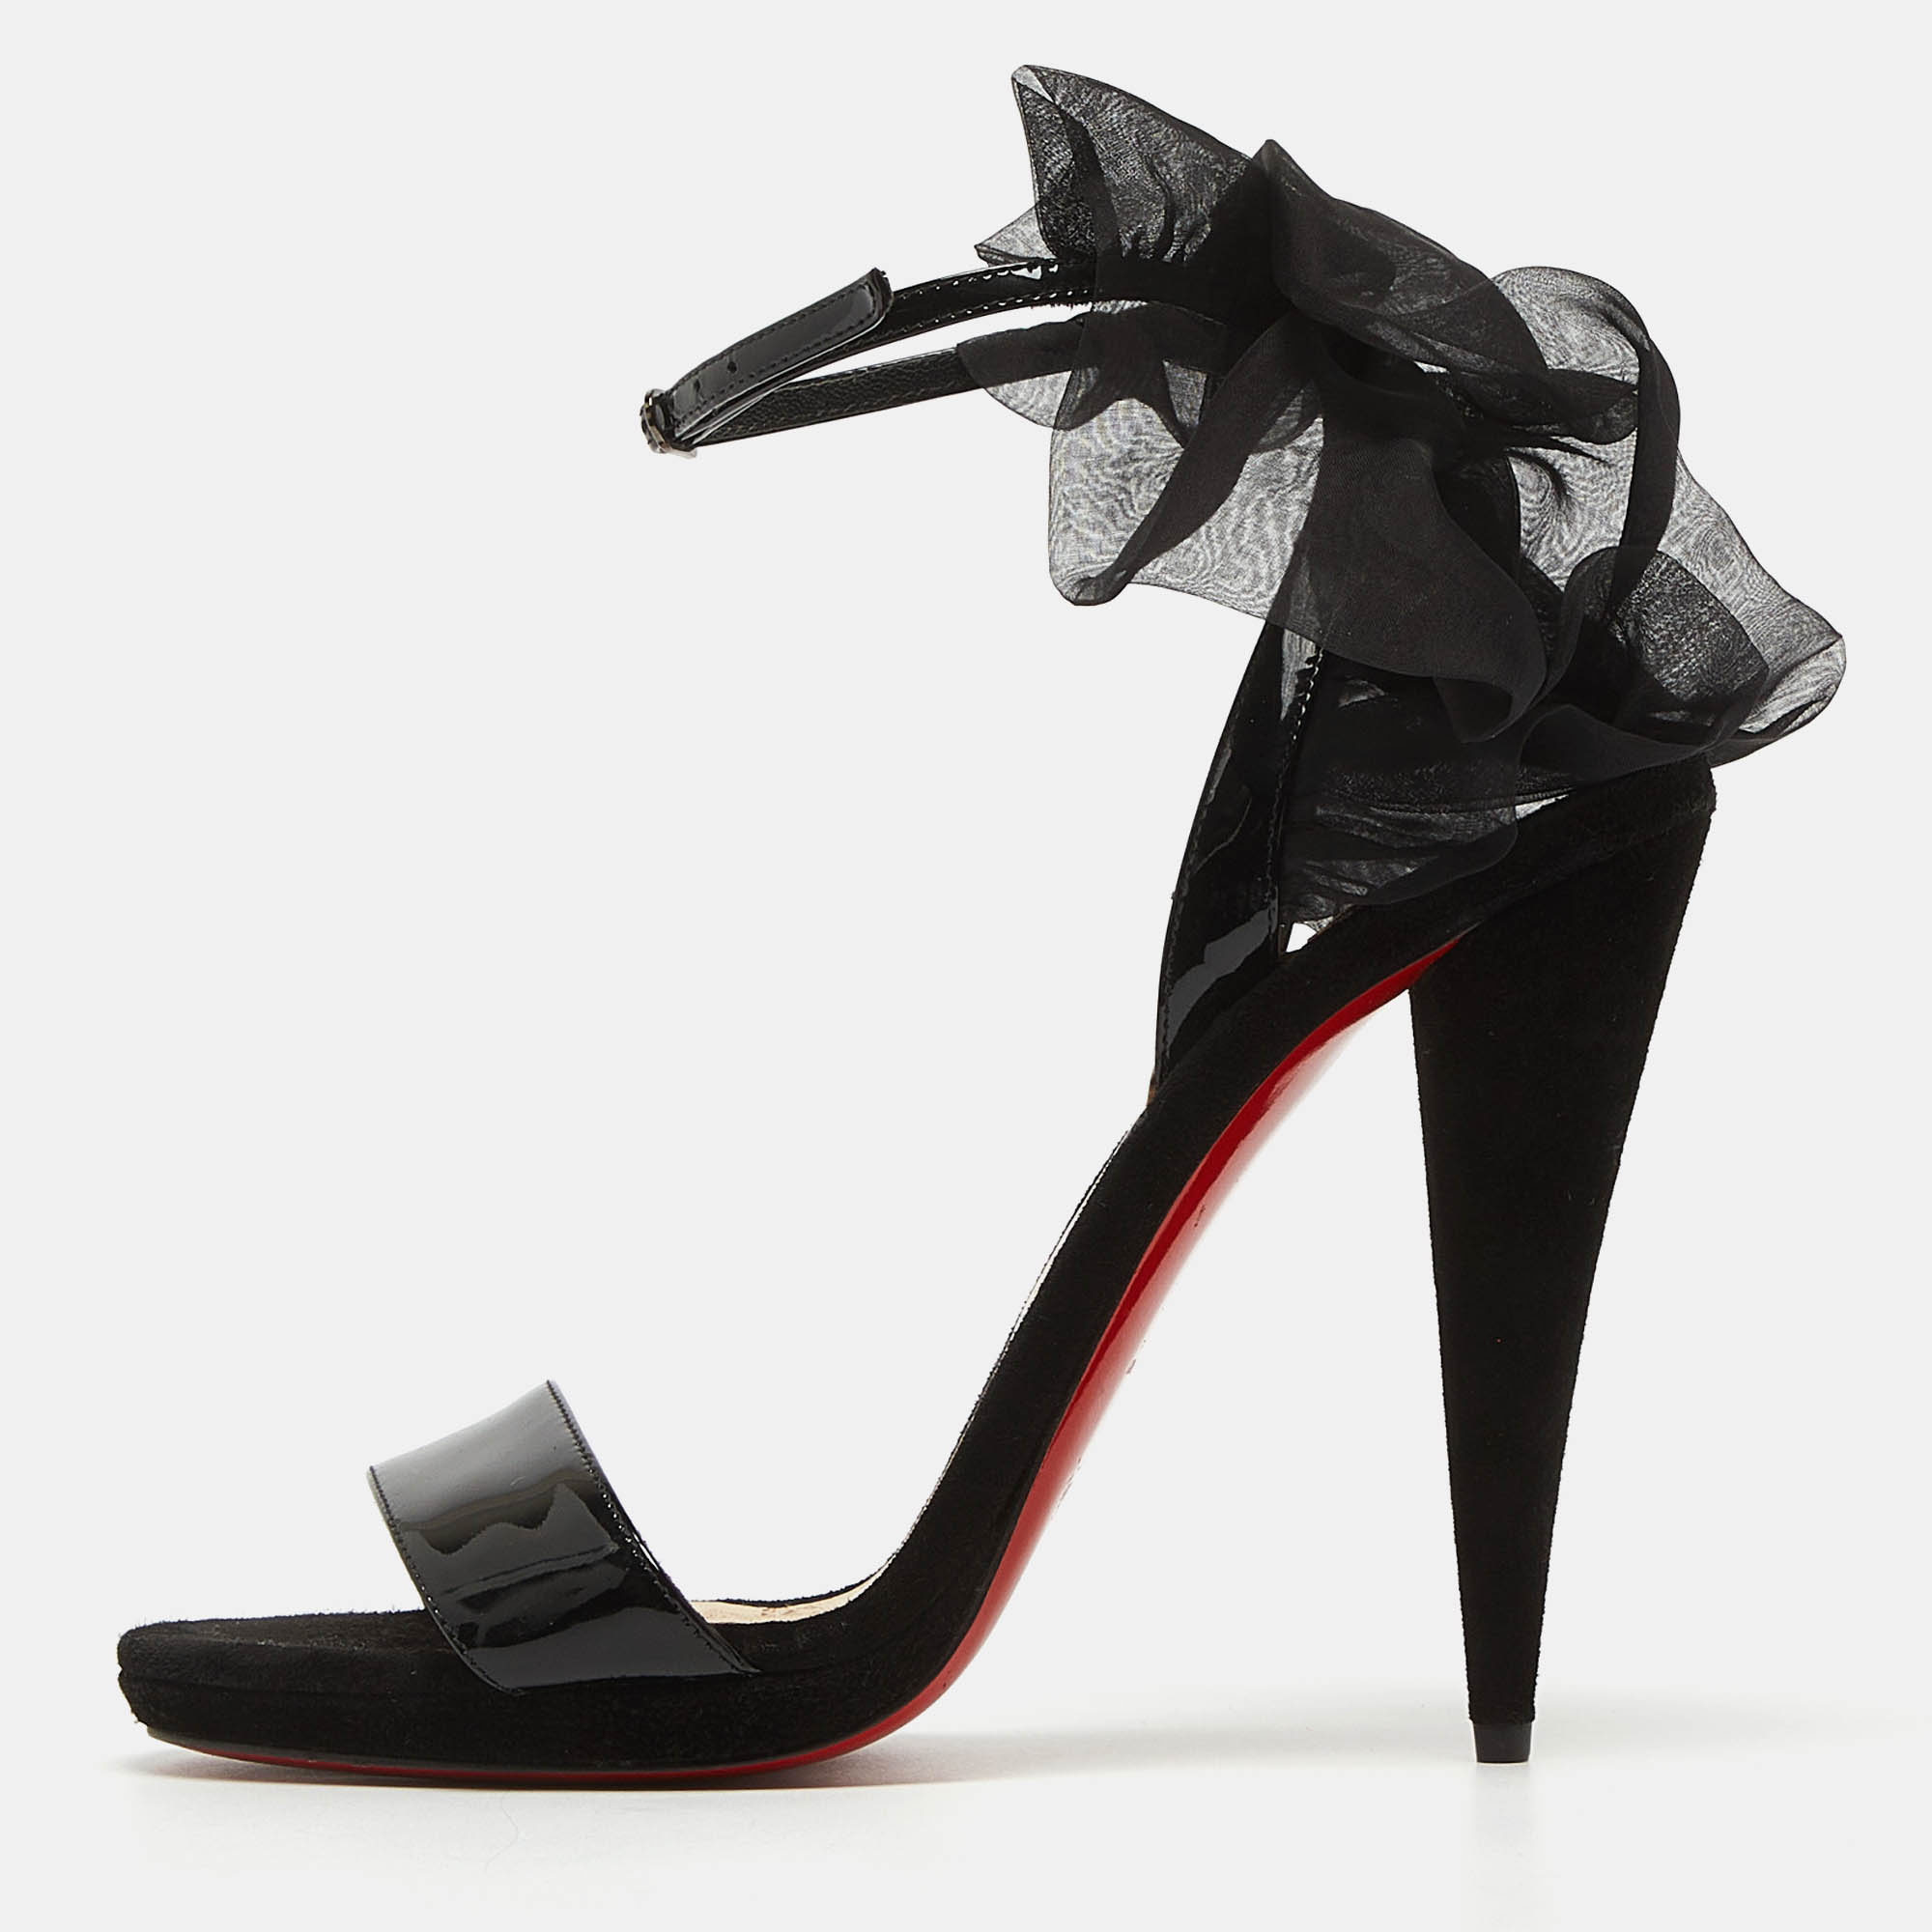 Christian louboutin black patent leather and fabric jacqueline sandals size 39